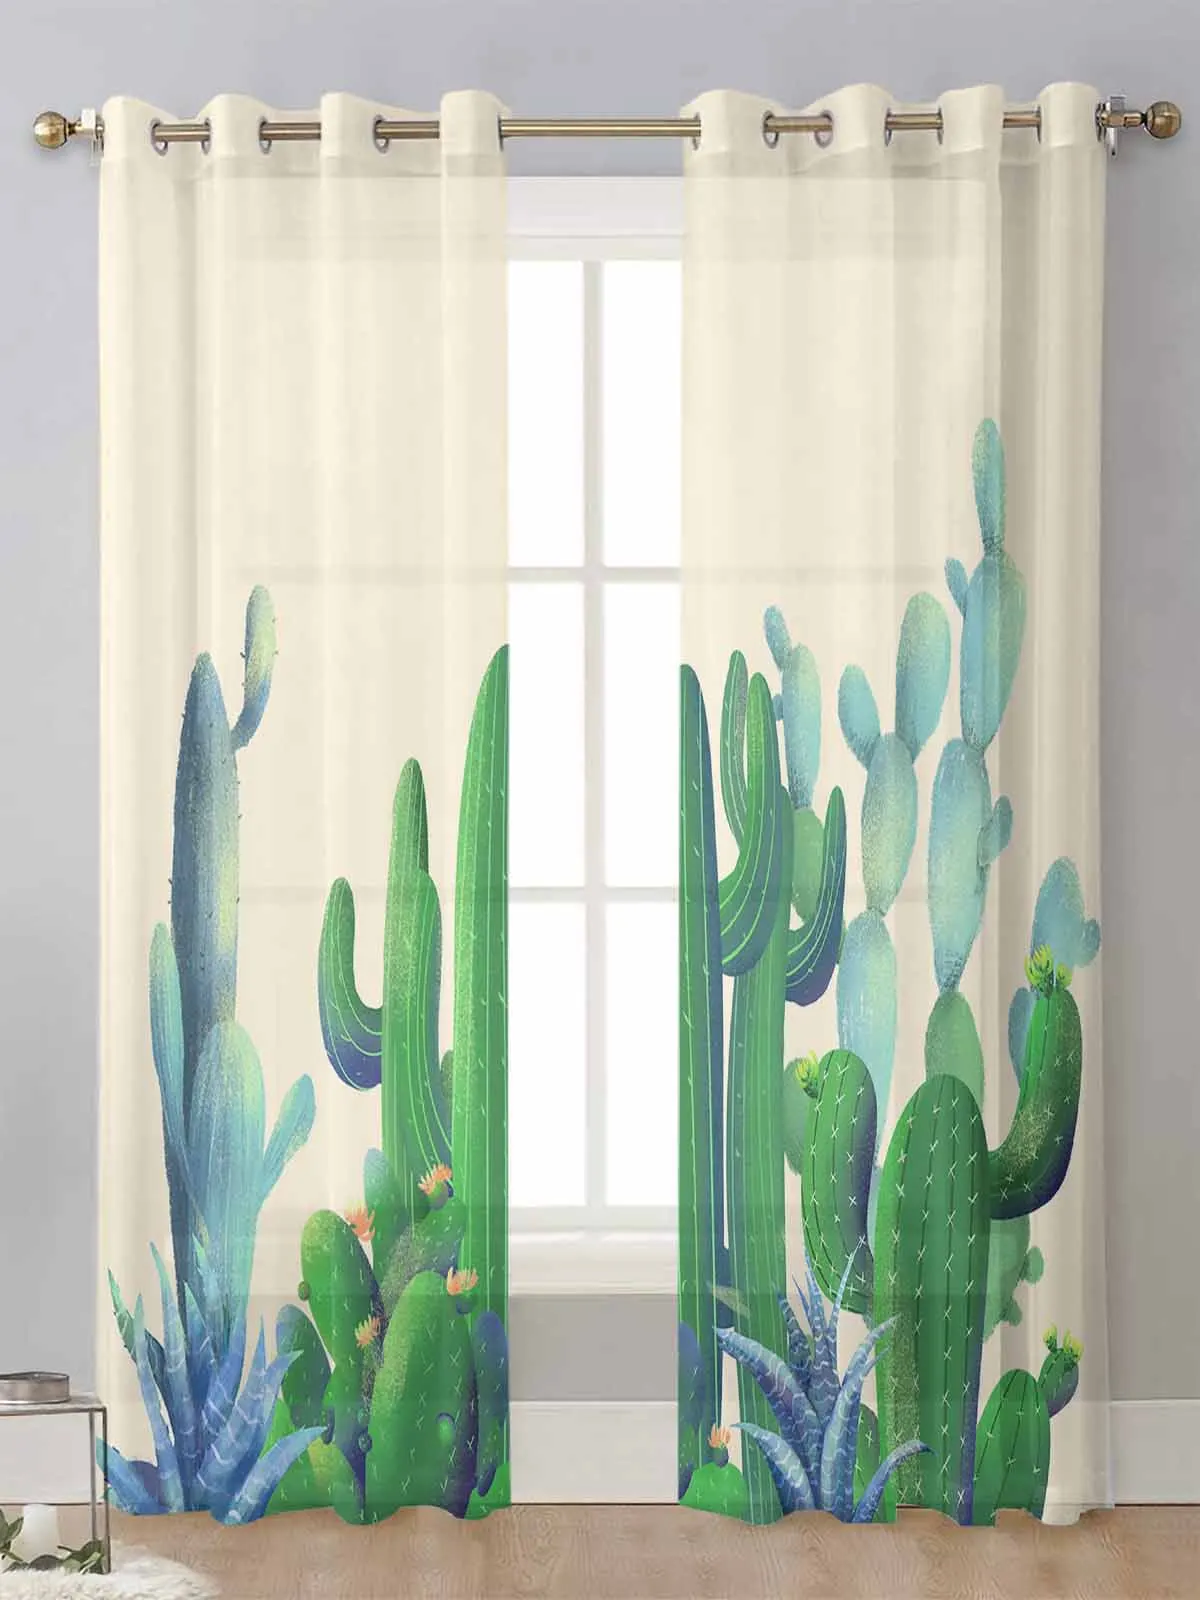 

Tropical Plant Cactus Succulent Sheer Curtains For Living Room Window Transparent Voile Tulle Curtain Cortinas Drapes Home Decor